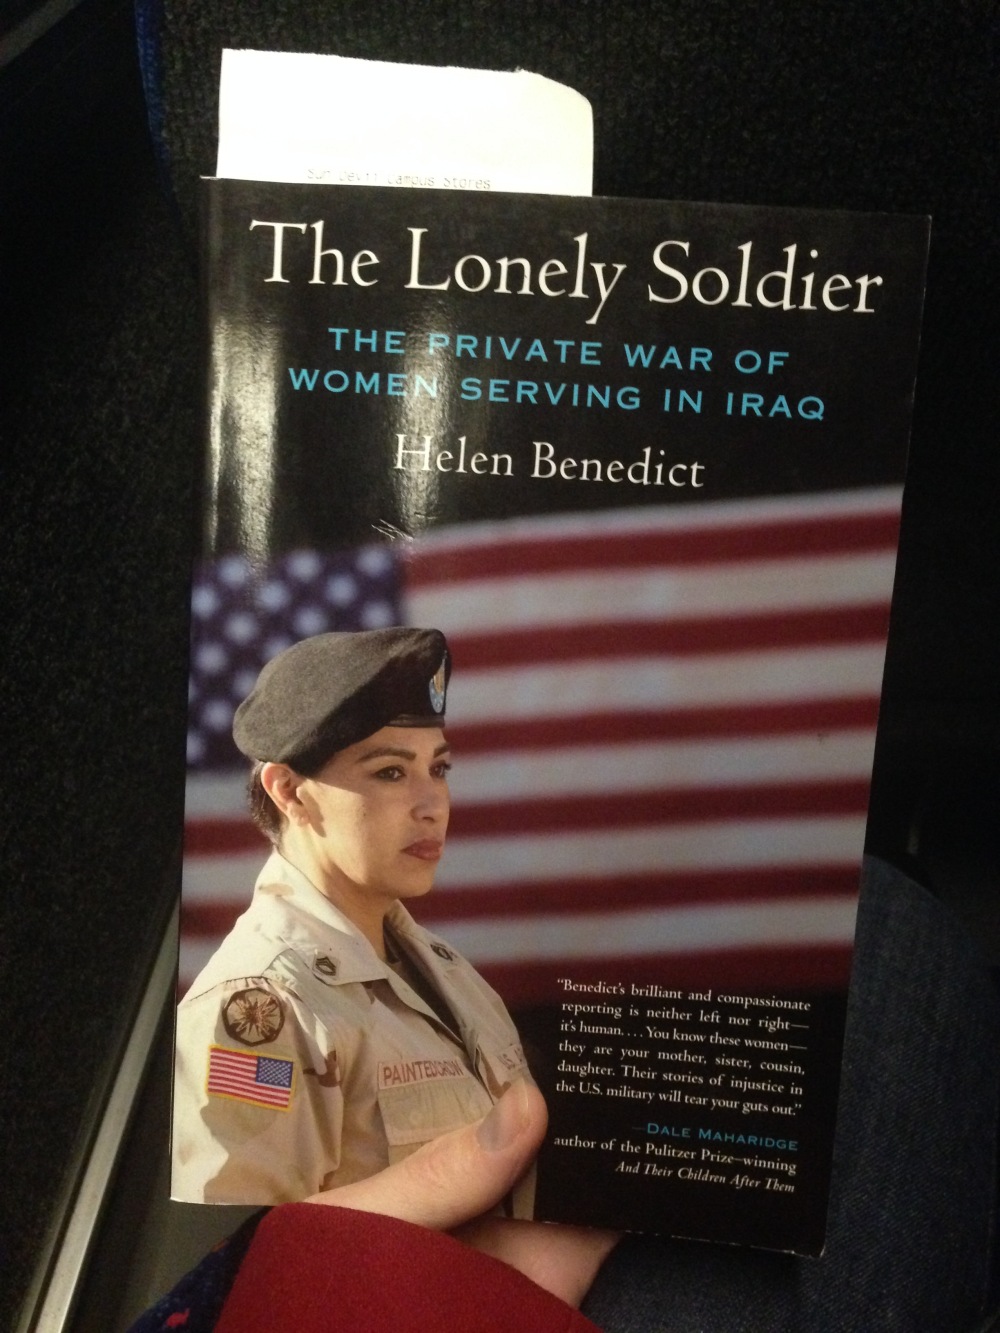 As a female veteran, I found this book to be an insulting representation of what life is like for women in the military in a time of war.